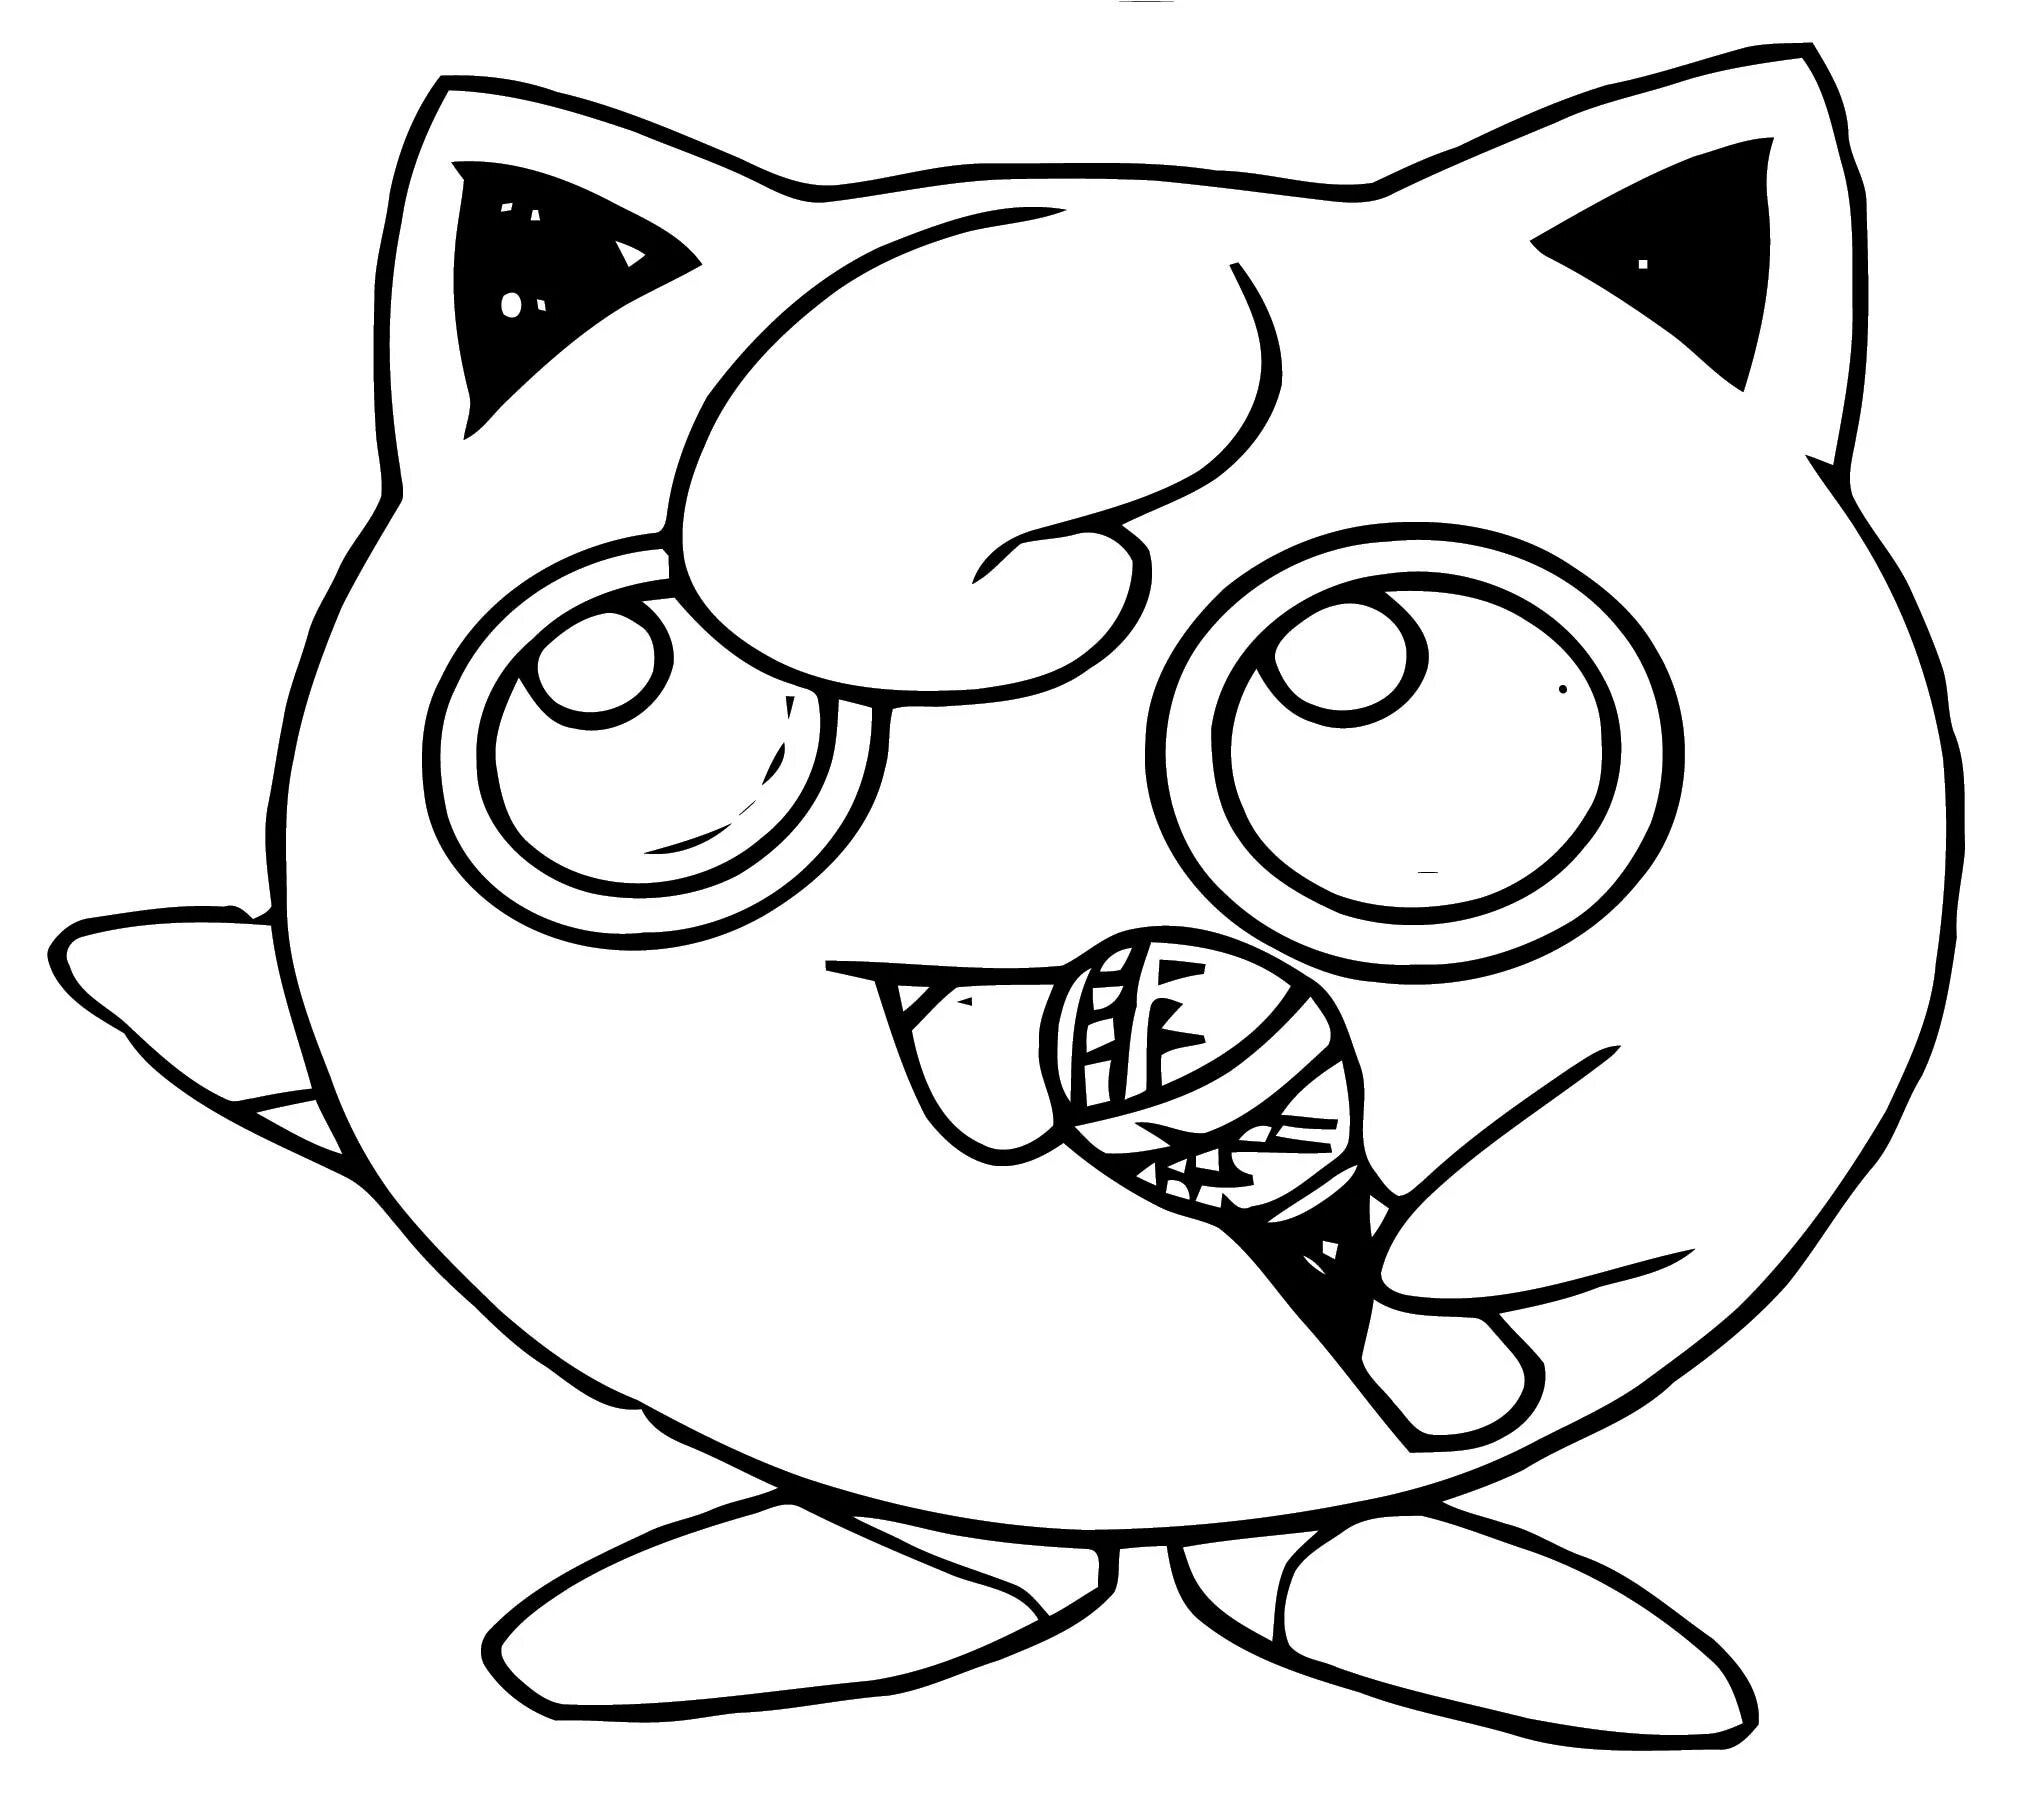 Coloring page dainty jigglypuff